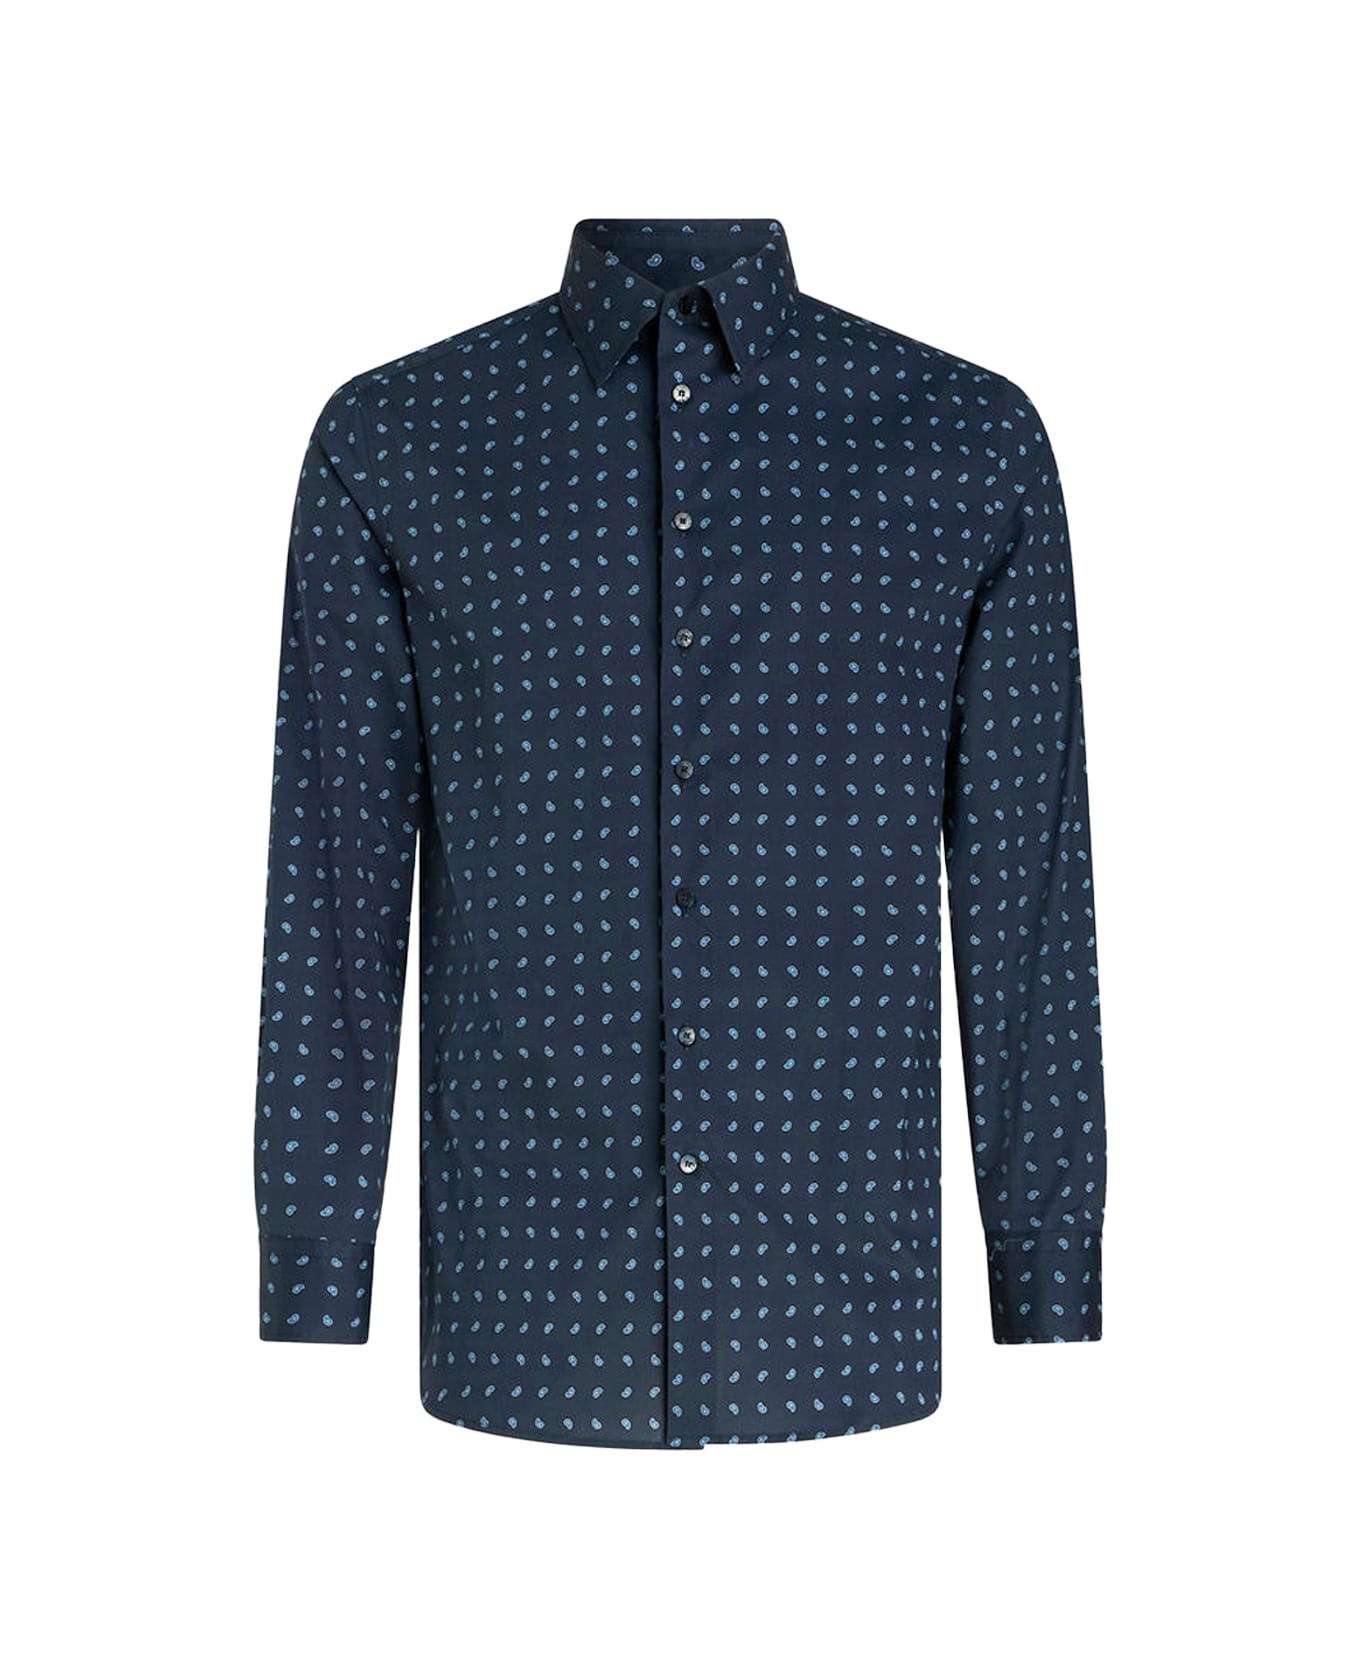 Etro Navy Blue Shirt With Micro Paisley Patterns - Blue